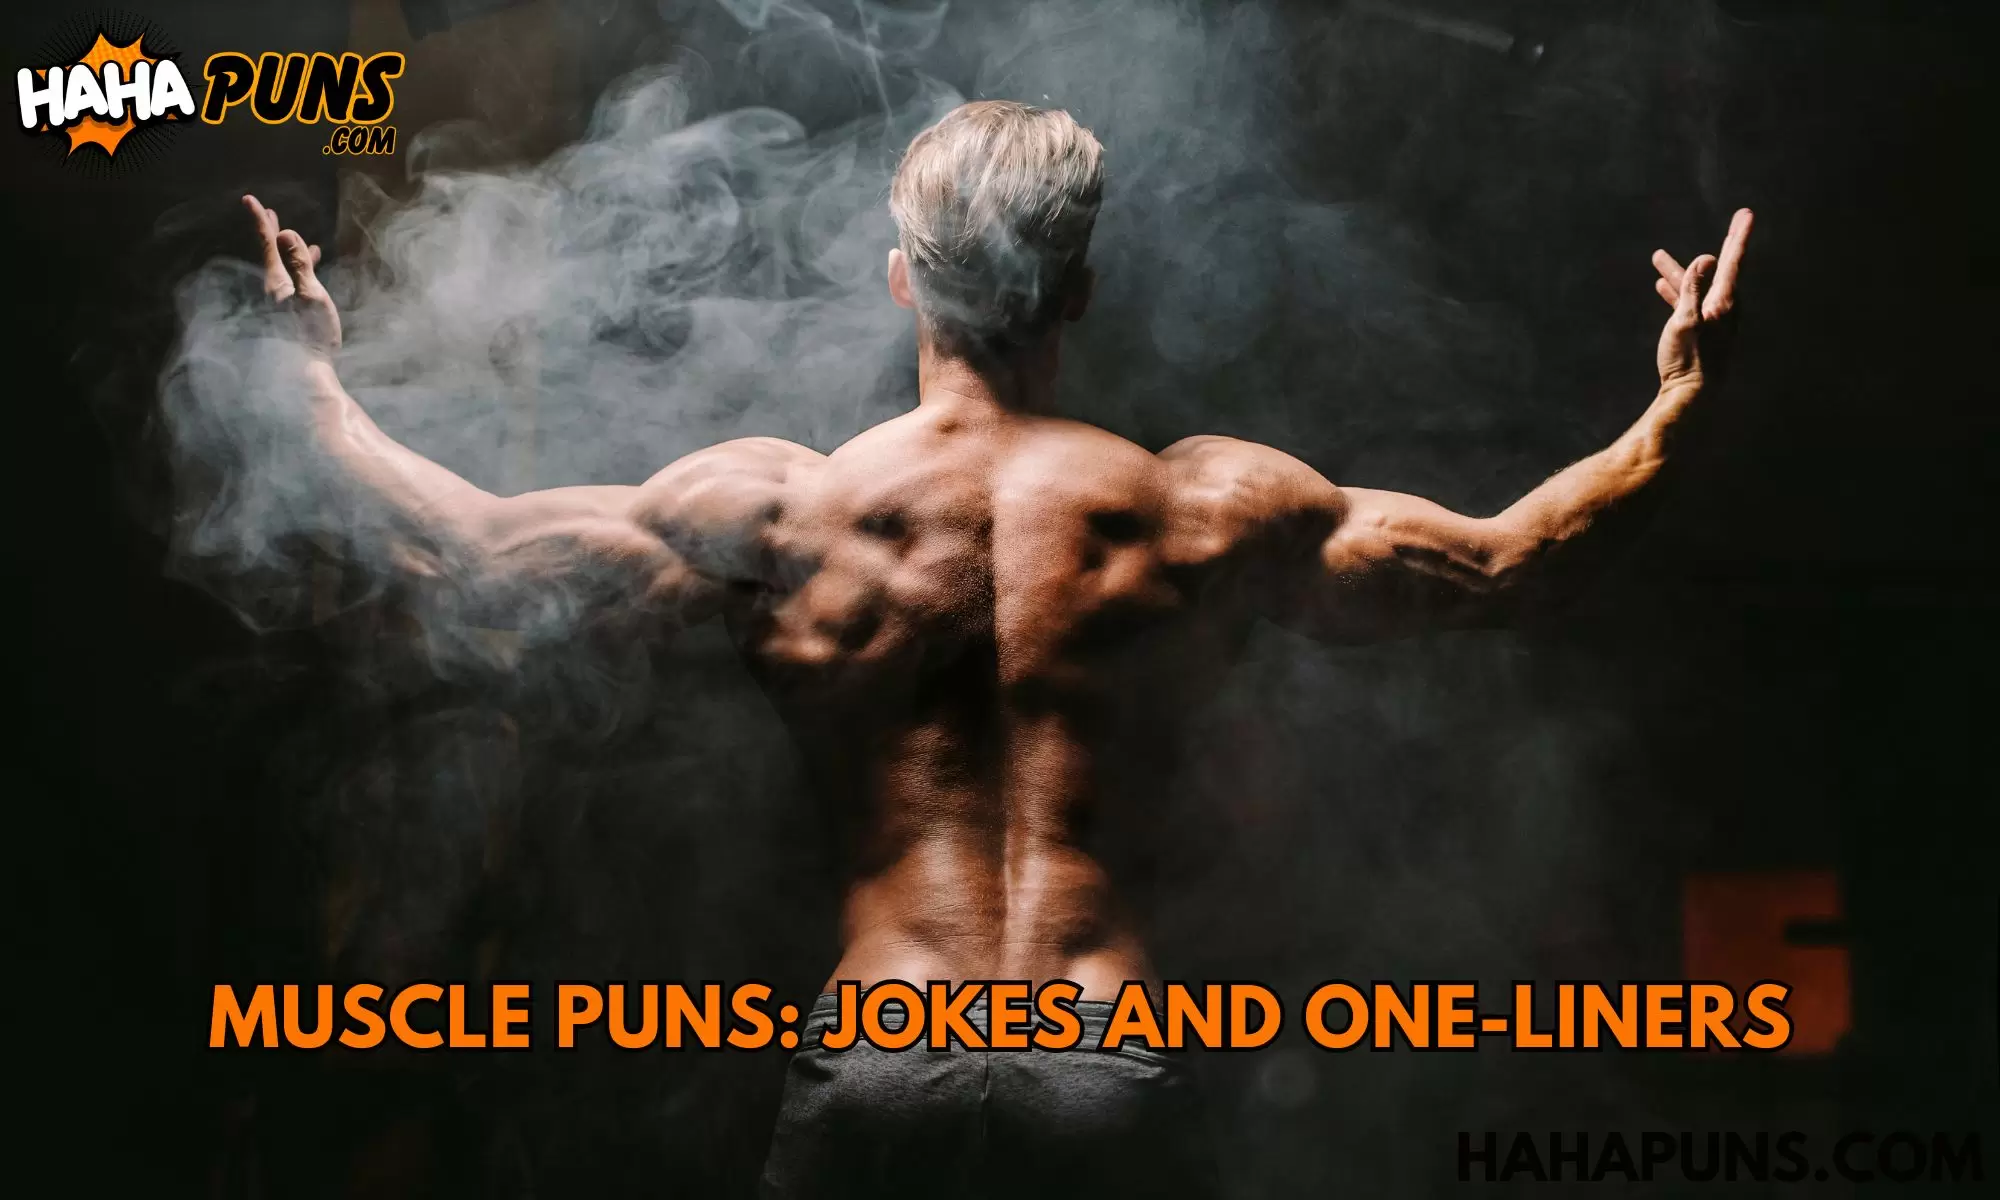 Muscle Puns: Jokes And One-Liners